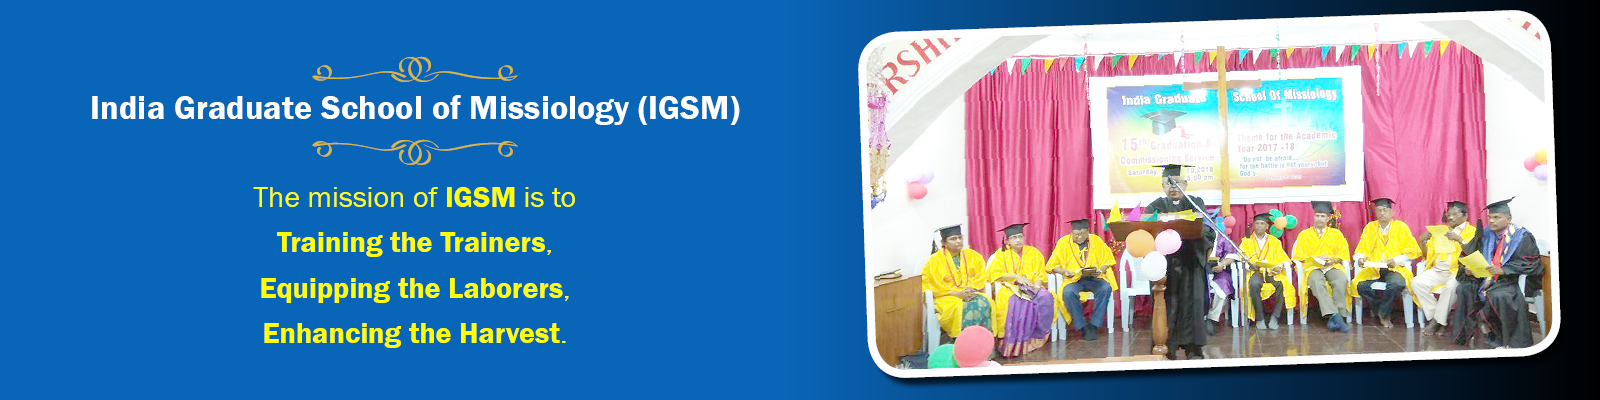 The mission of India Graduate School of Missiology (IGSM) is to Training the Trainers, Equipping the Laborers, Enhancing the Harvest.